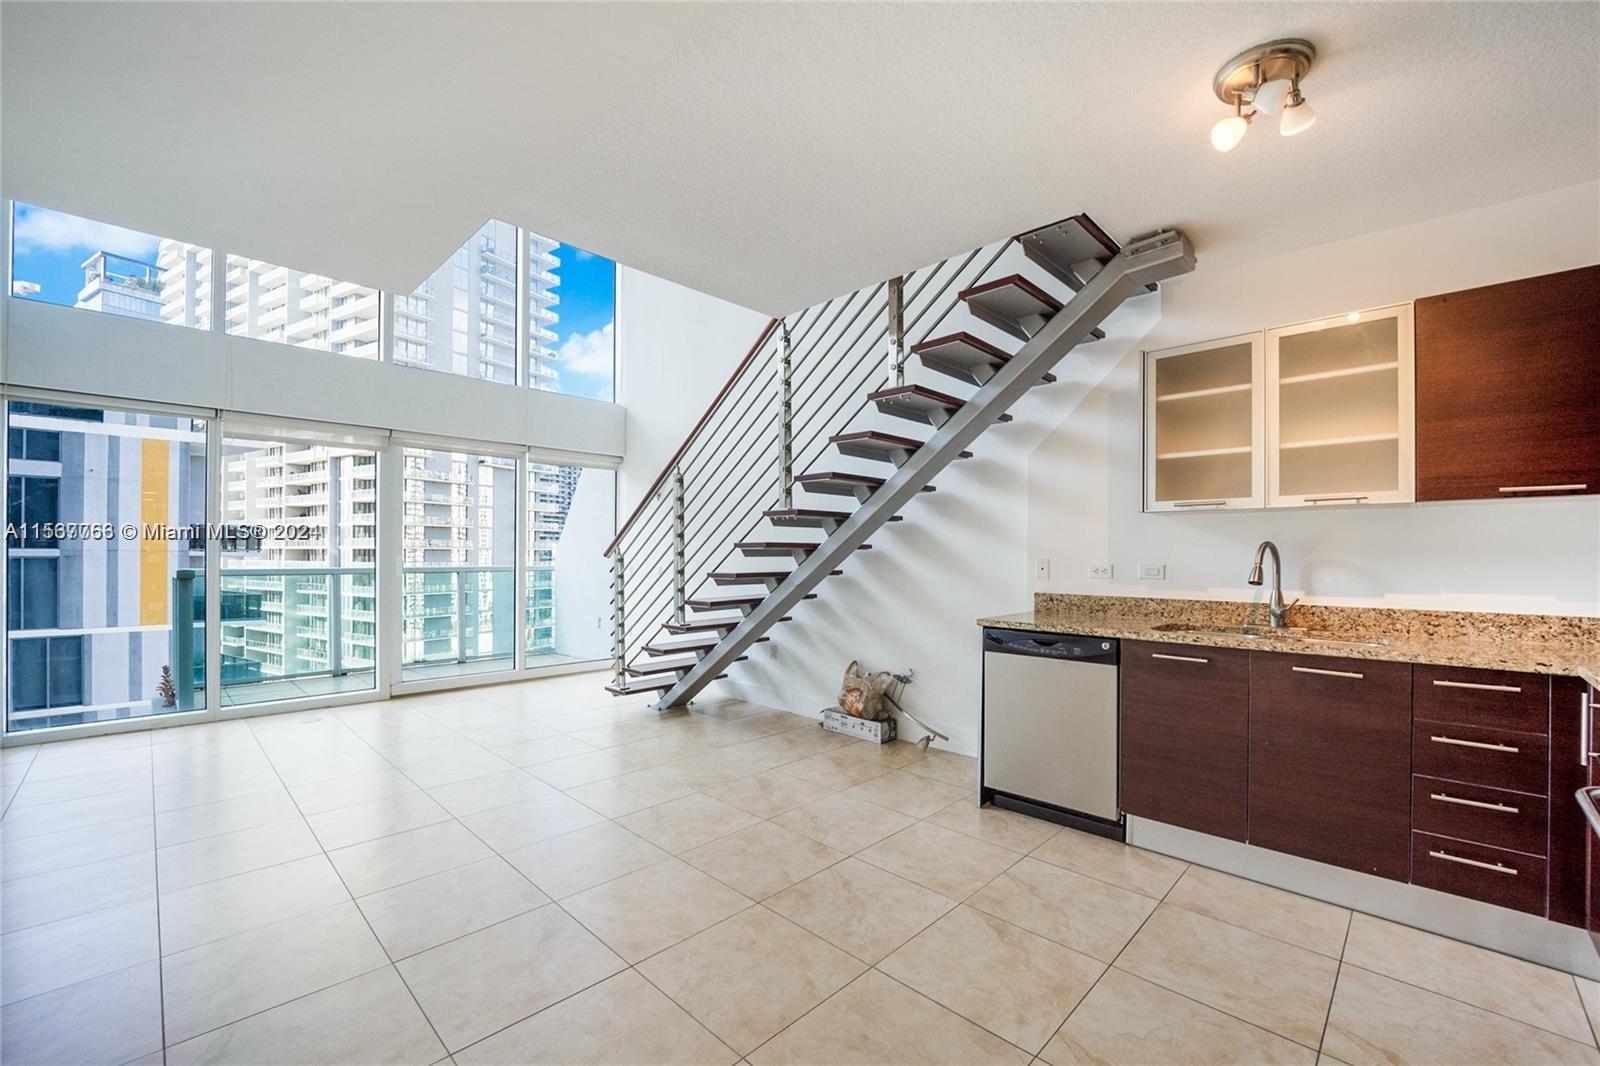 Miami, Florida 33131, 1 Bedroom Bedrooms, ,1 BathroomBathrooms,Residentiallease,For Rent,A11567763